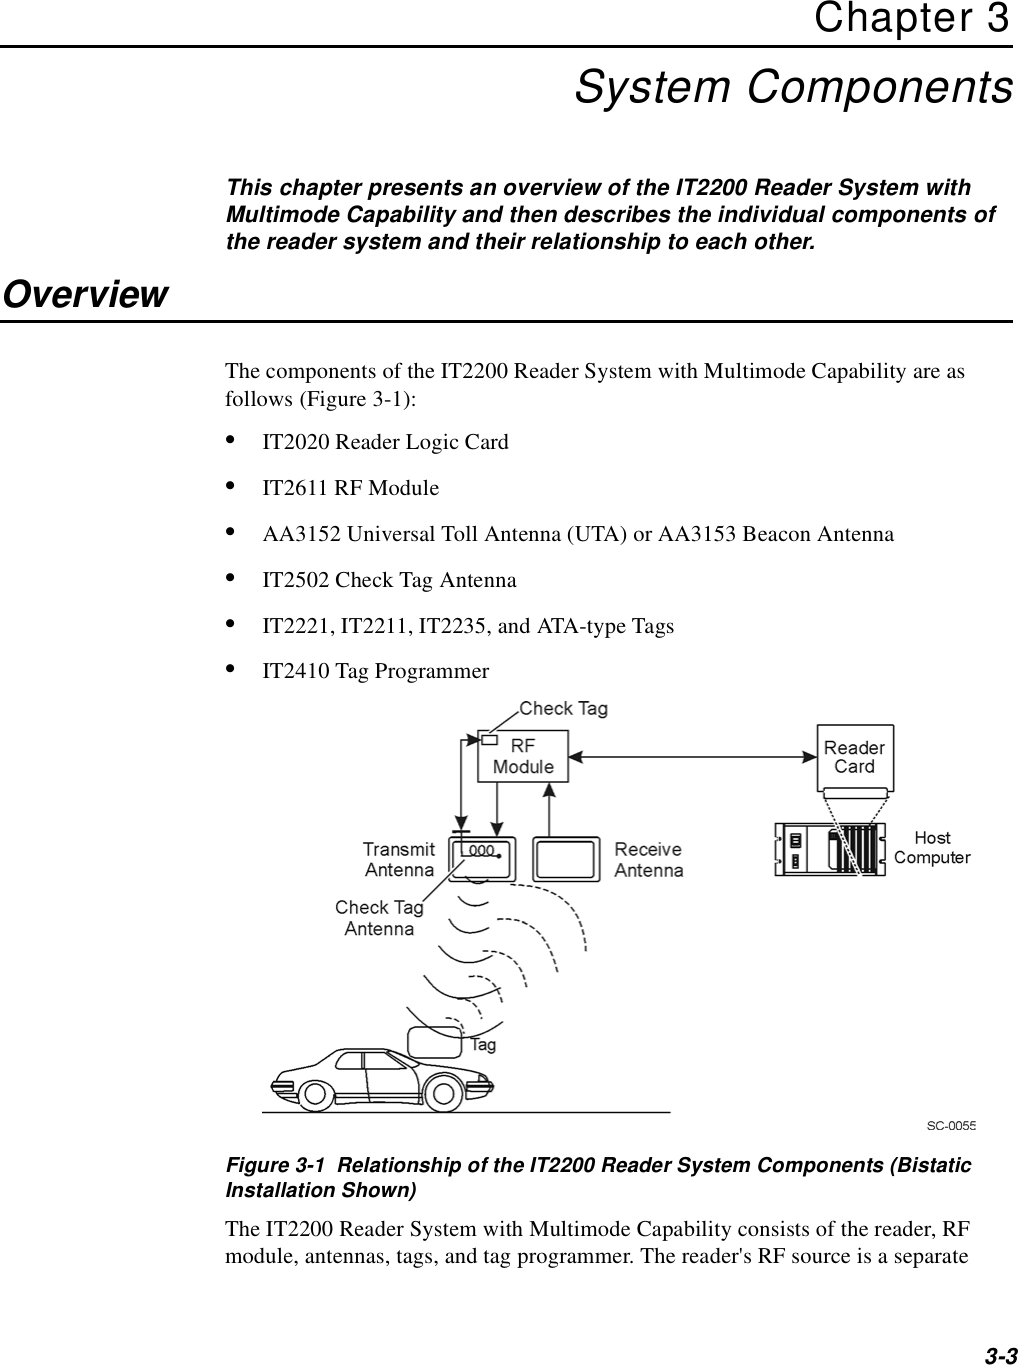 3-3Chapter 3System ComponentsThis chapter presents an overview of the IT2200 Reader System with Multimode Capability and then describes the individual components of the reader system and their relationship to each other.OverviewThe components of the IT2200 Reader System with Multimode Capability are as follows (Figure 3-1):•IT2020 Reader Logic Card•IT2611 RF Module•AA3152 Universal Toll Antenna (UTA) or AA3153 Beacon Antenna•IT2502 Check Tag Antenna•IT2221, IT2211, IT2235, and ATA-type Tags•IT2410 Tag ProgrammerFigure 3-1  Relationship of the IT2200 Reader System Components (Bistatic Installation Shown)The IT2200 Reader System with Multimode Capability consists of the reader, RF module, antennas, tags, and tag programmer. The reader&apos;s RF source is a separate 